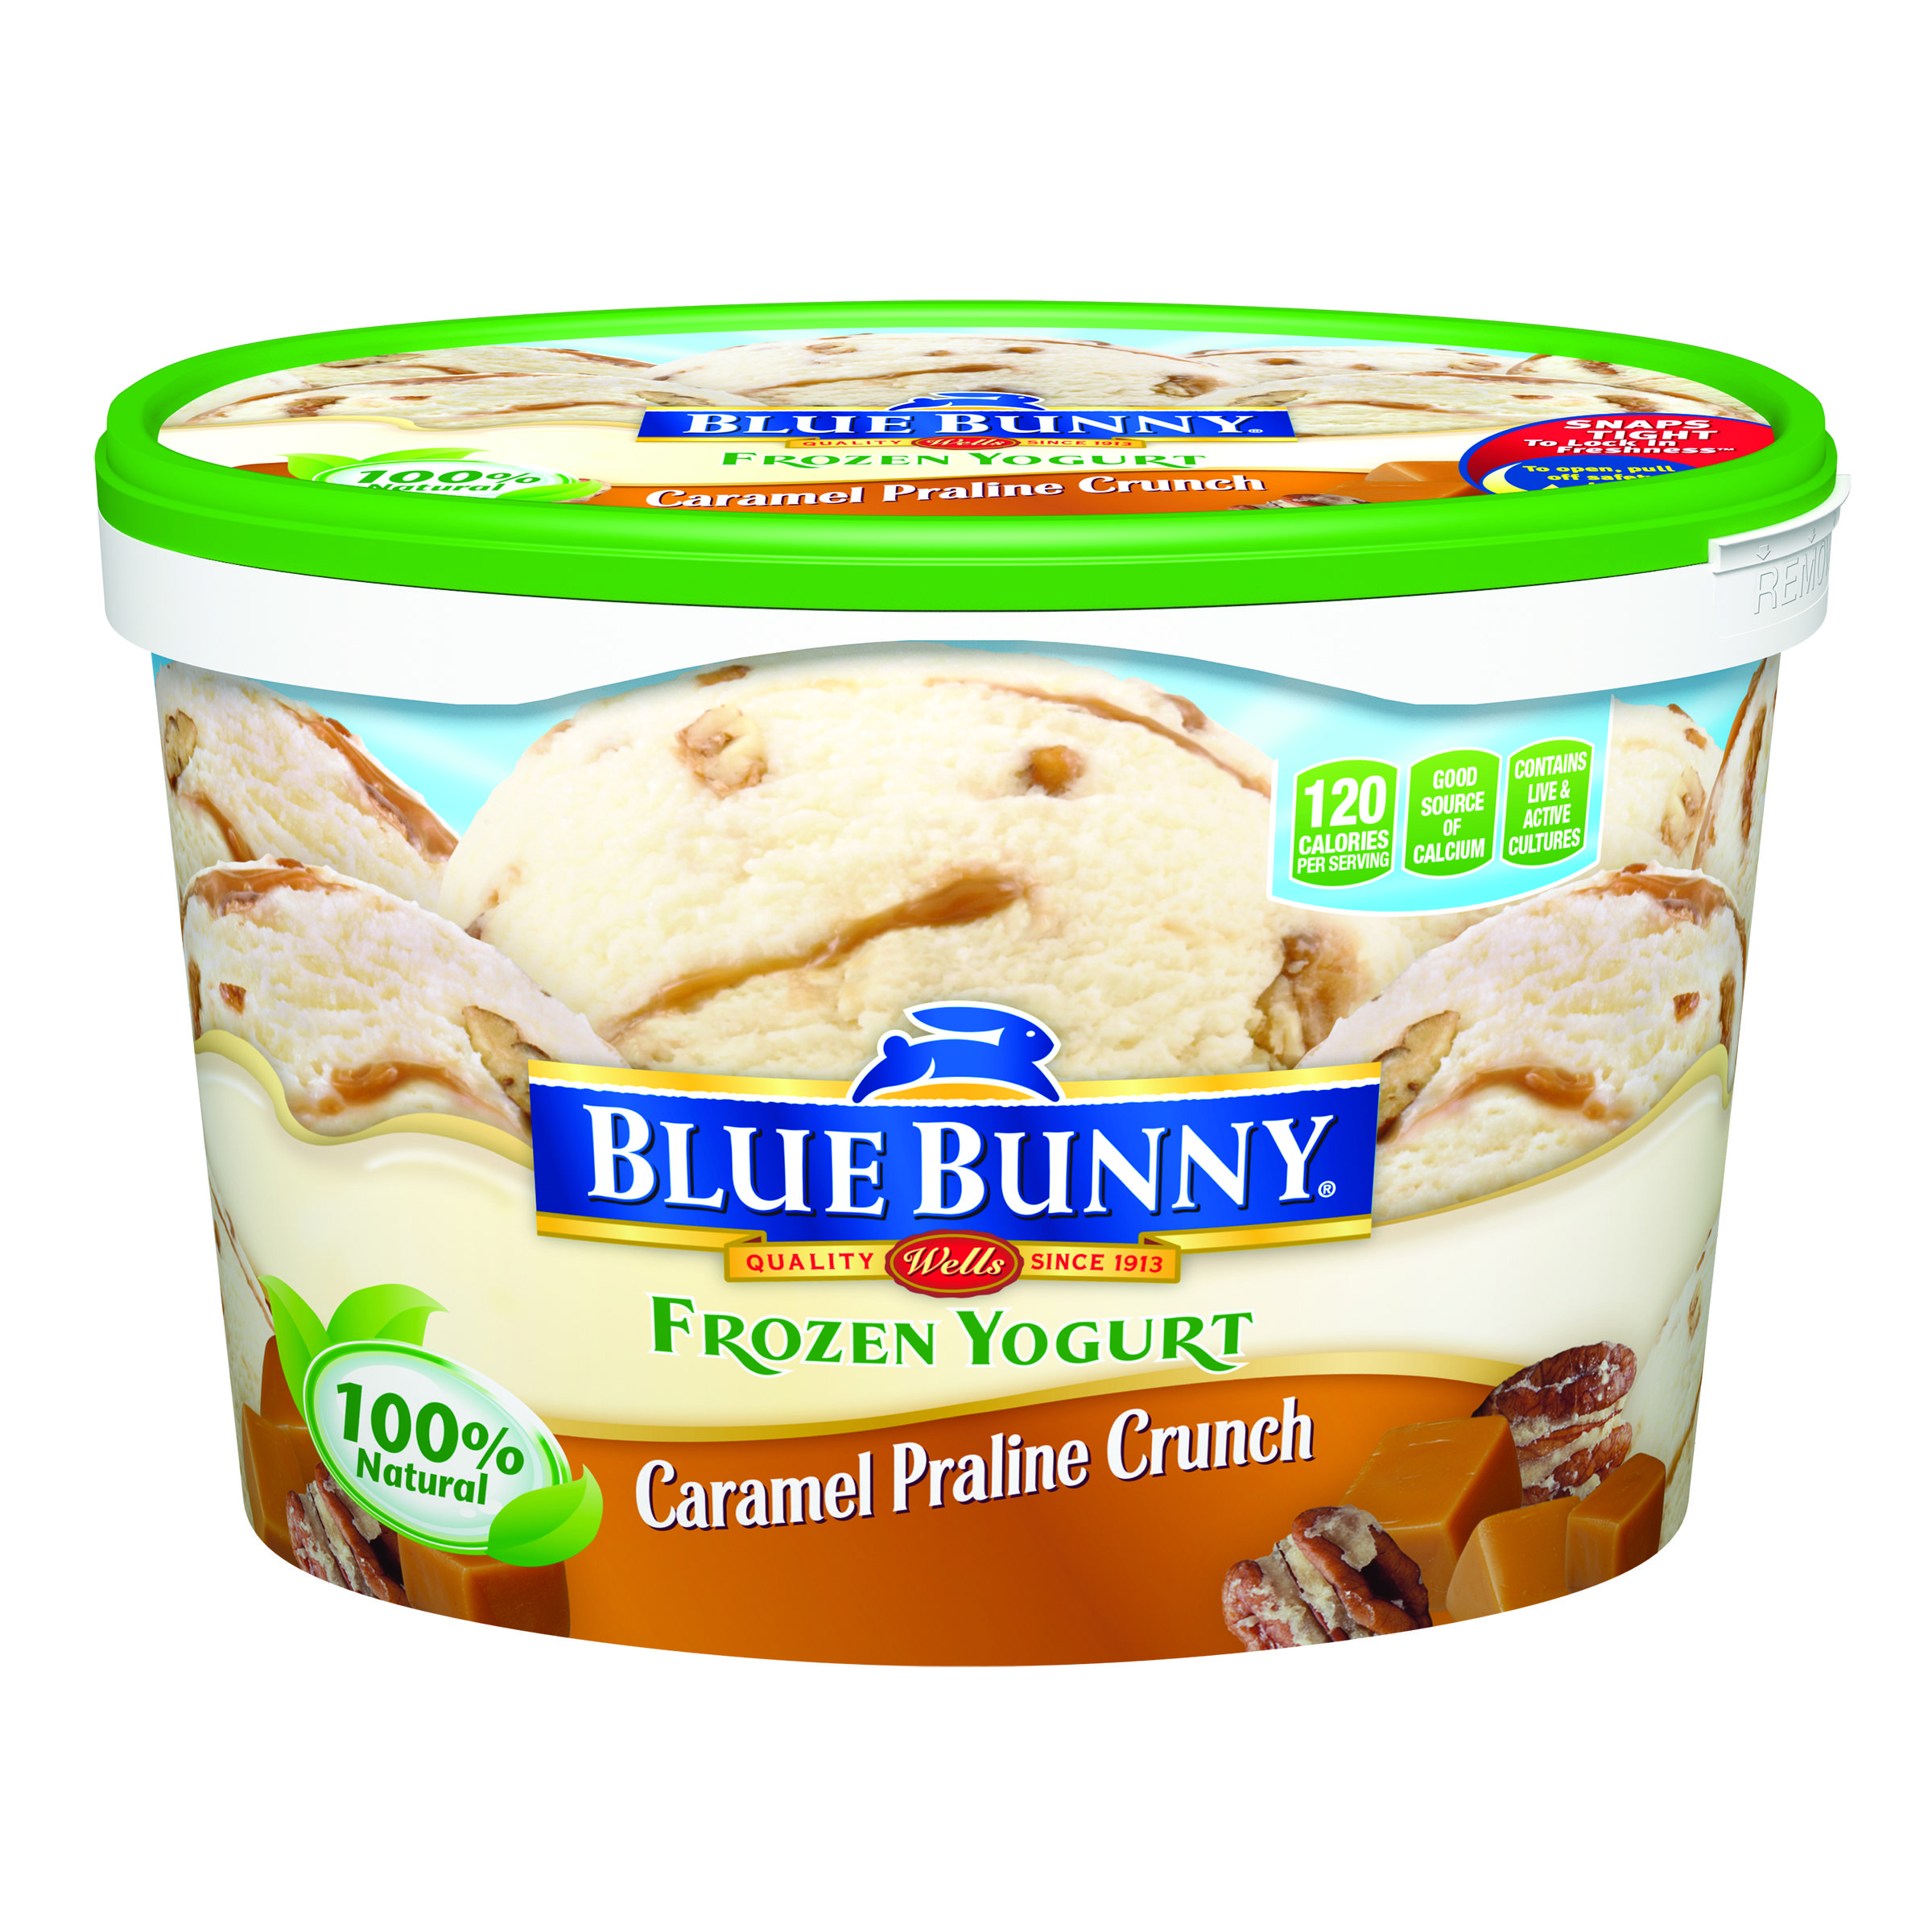 Celebrate National Caramel Day with Blue Bunny Ice Cream {April 5th}